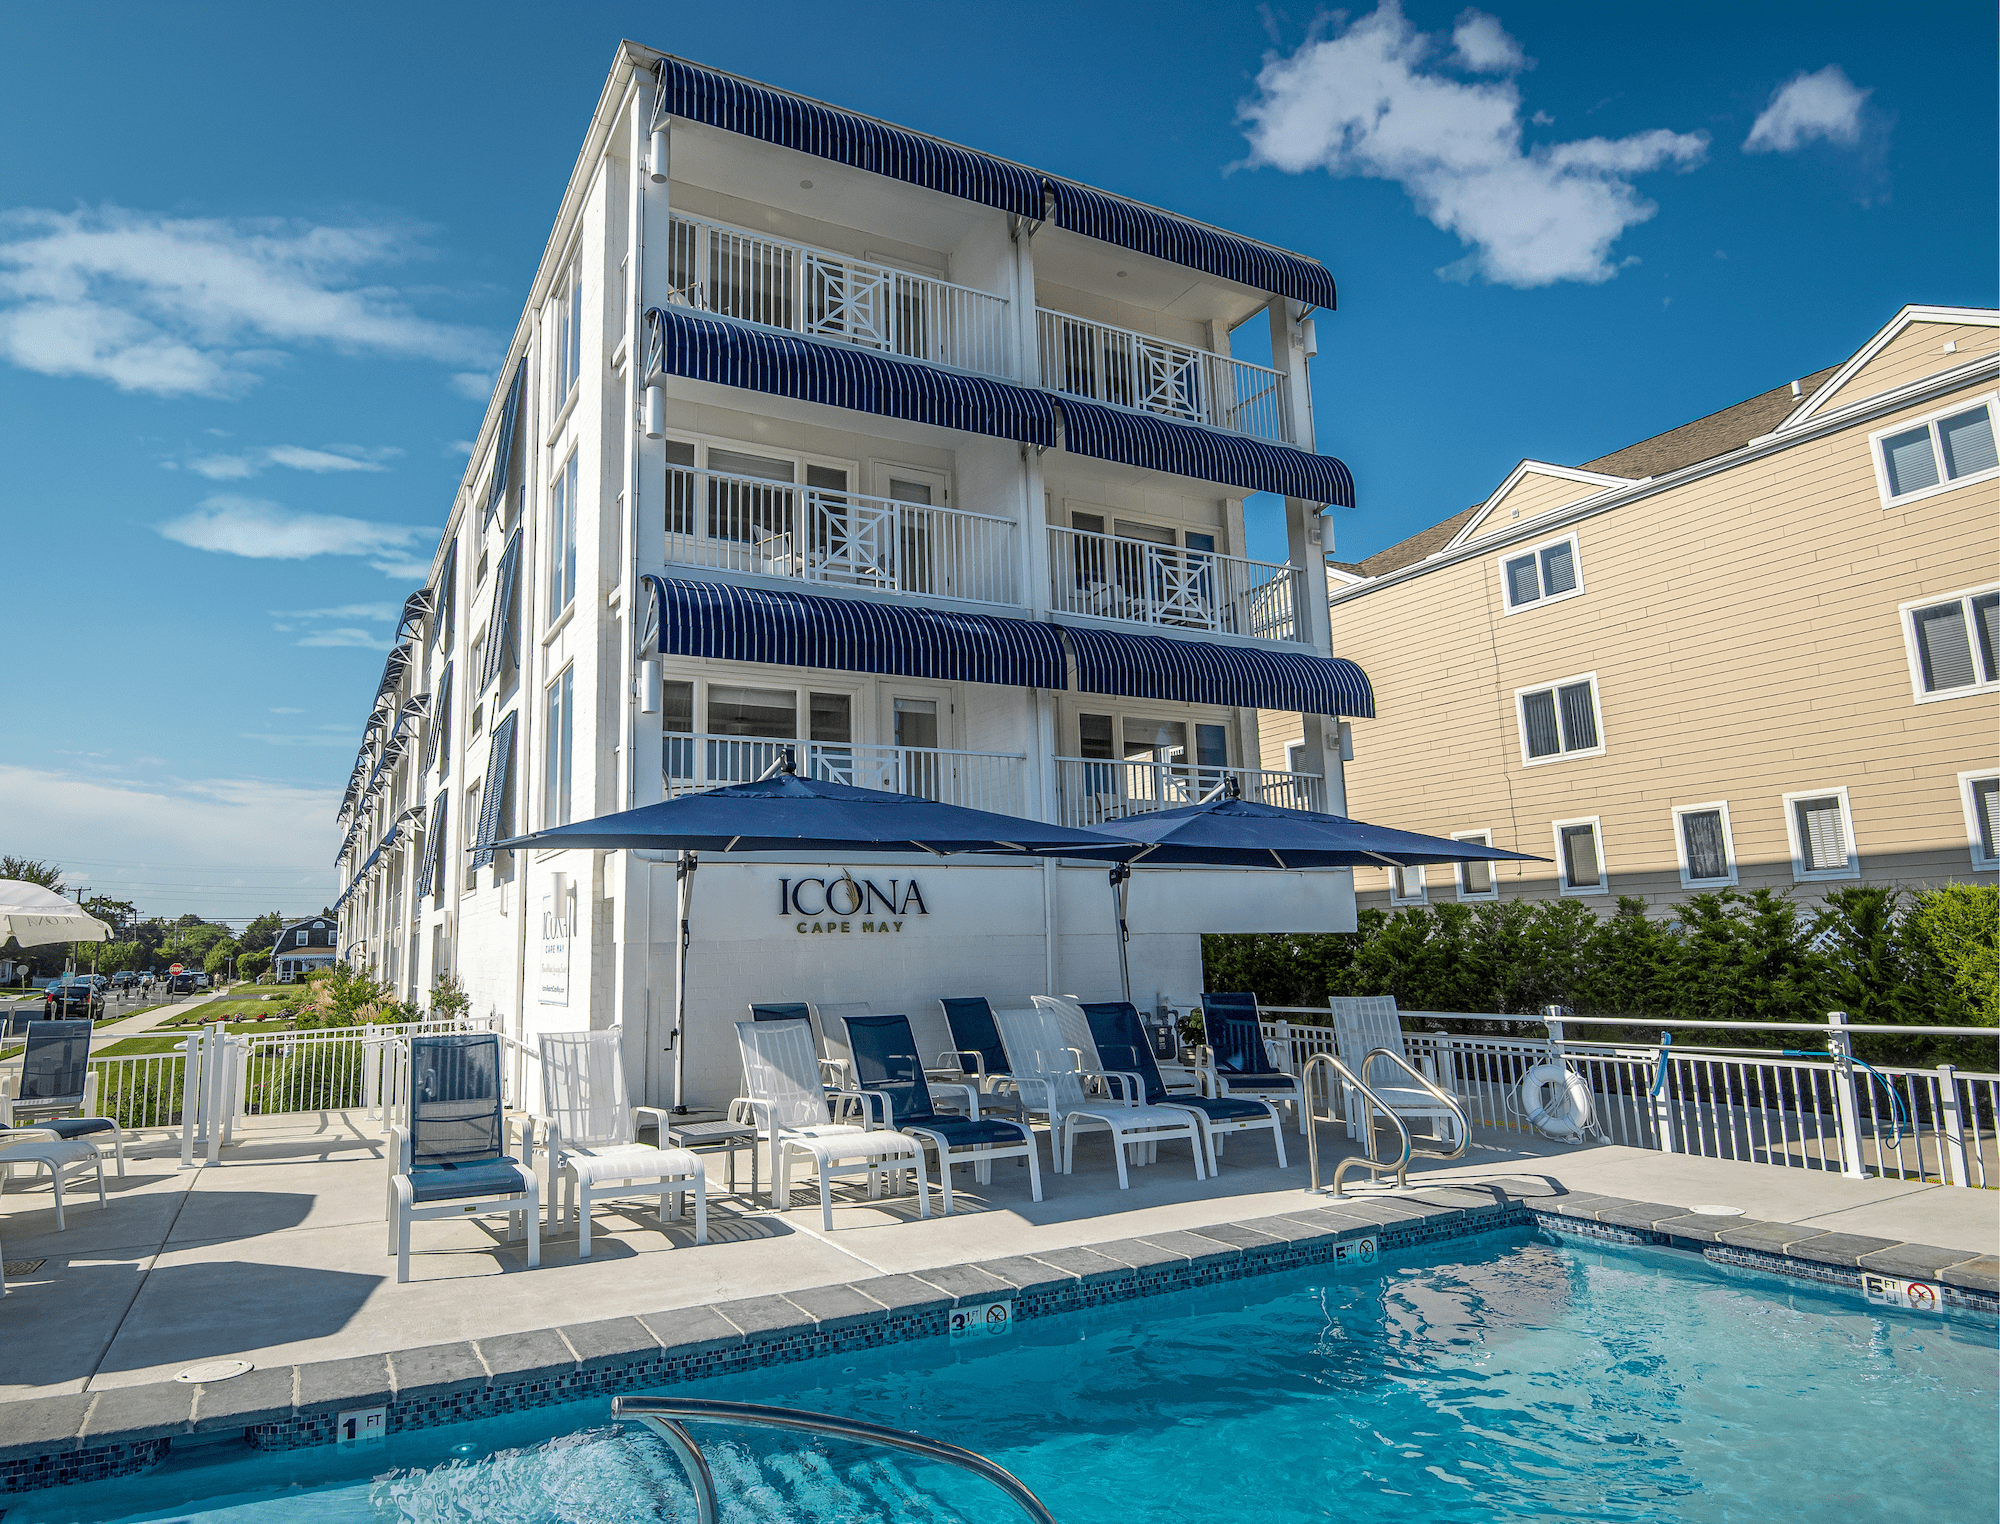 cape may hotels in New Jersey icona hotel nj 